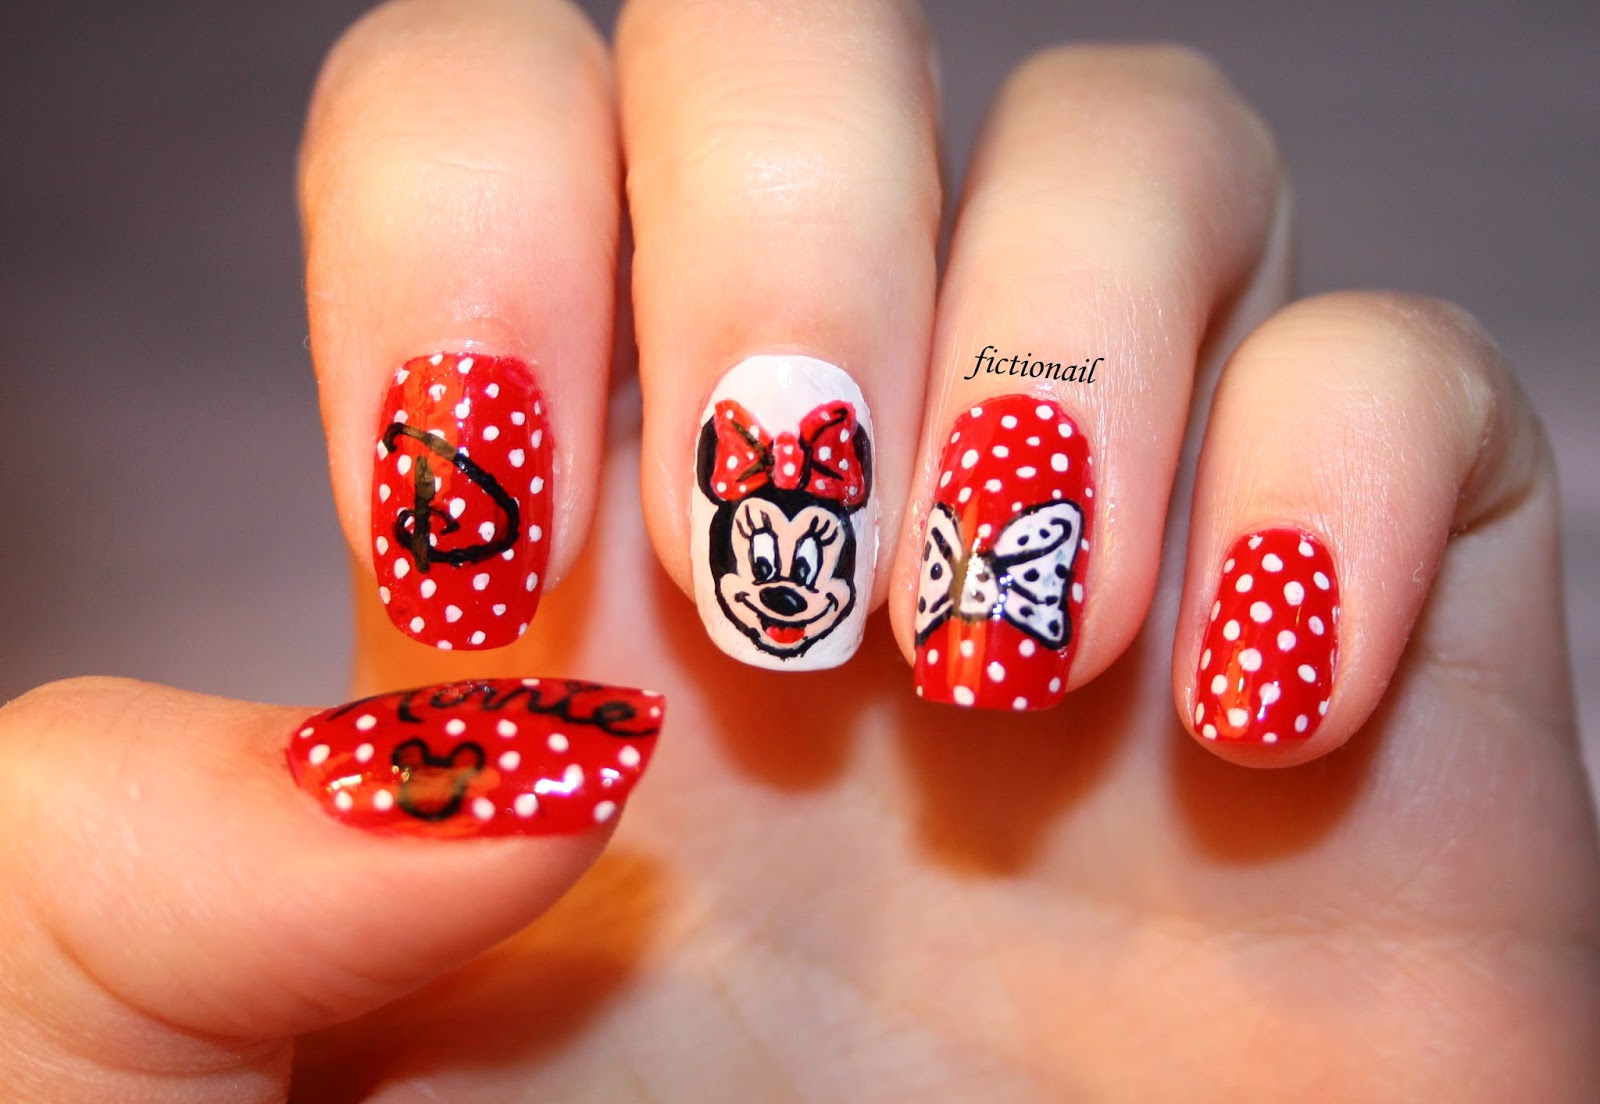 6. Minnie Mouse Nail Art for Short Nails - wide 1